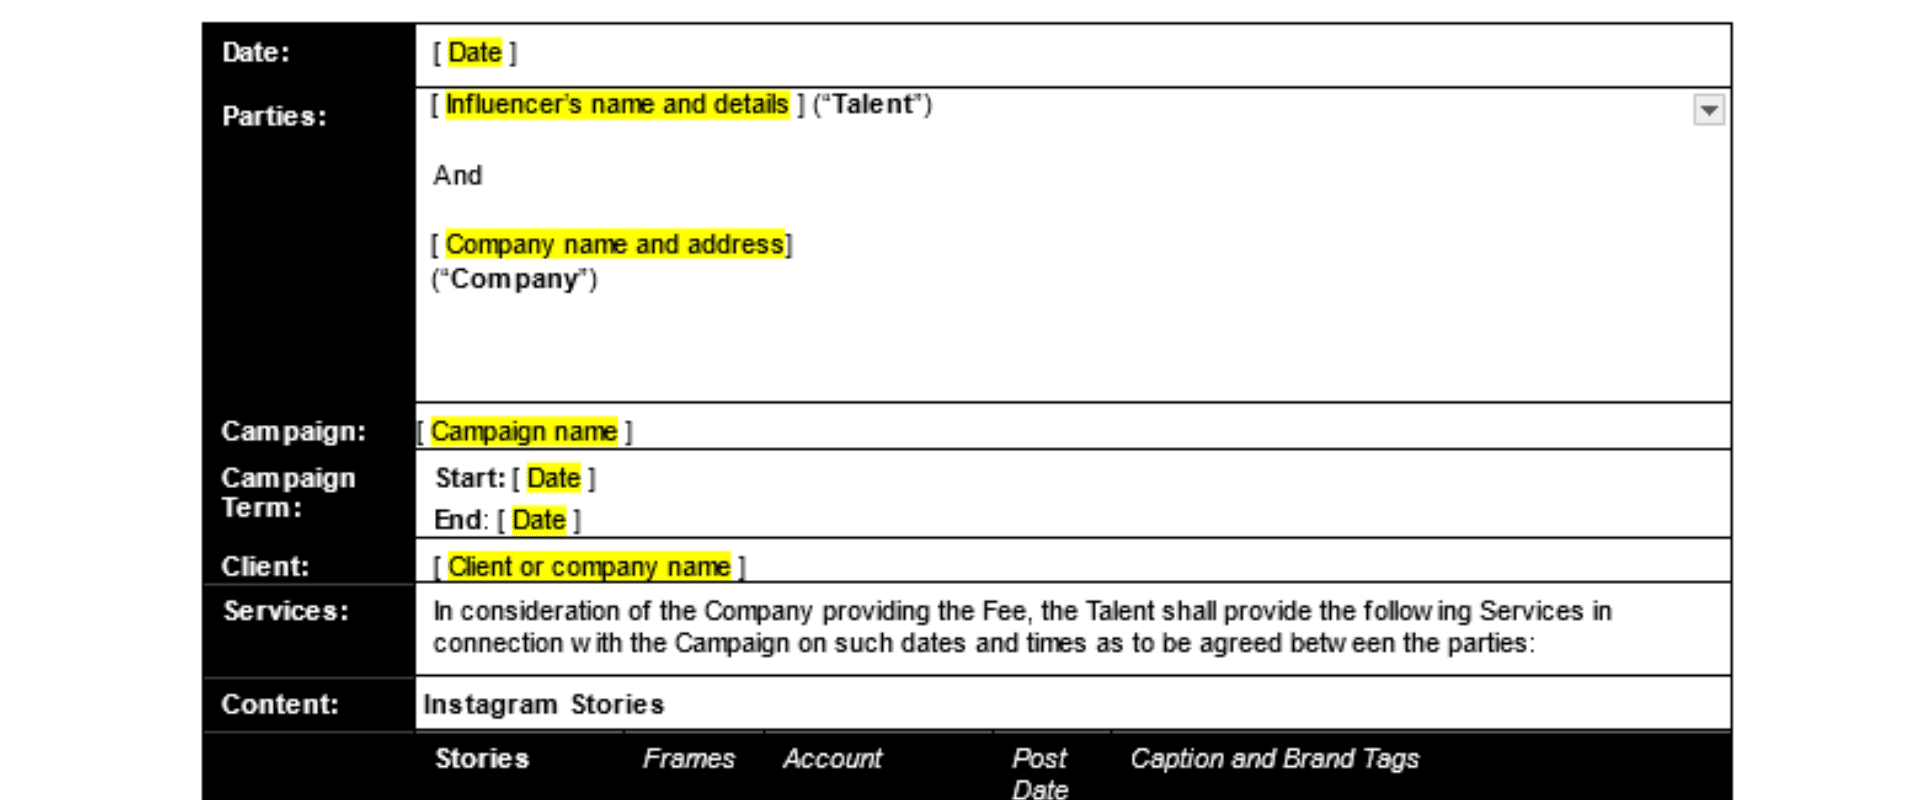 An example of a contract template.